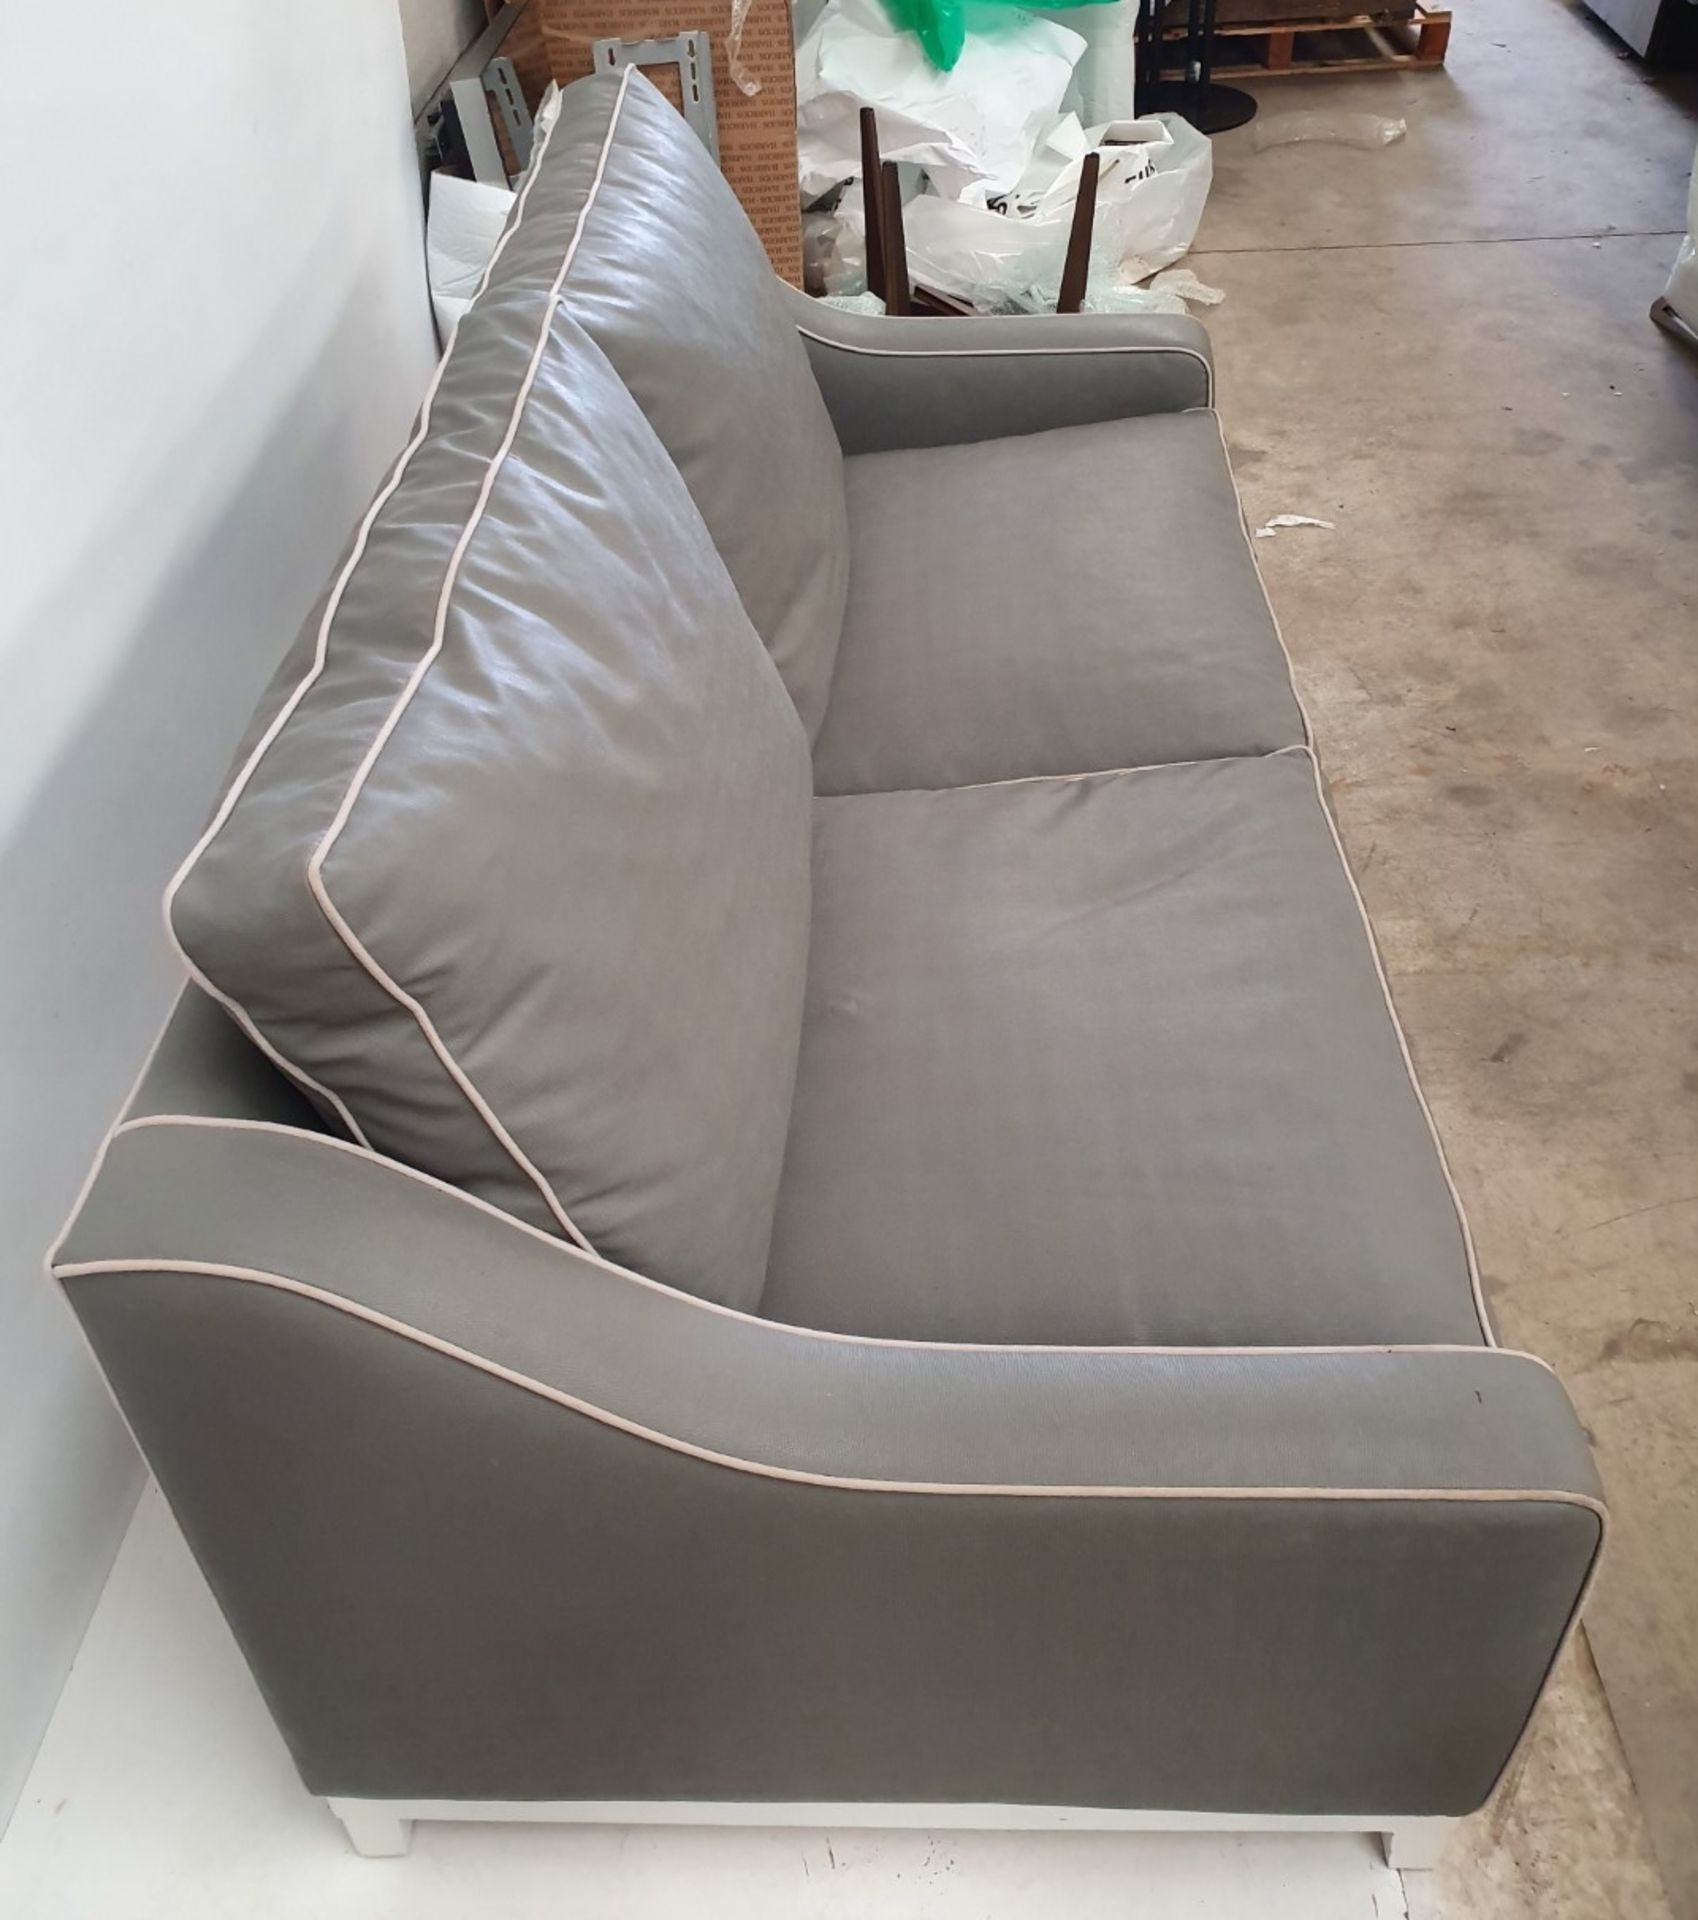 1 x Contemporary 2-Seater Grey Leather Sofa - CL380 - Ref: H582 - Location: Altrincham WA14 - NO VAT - Image 5 of 13